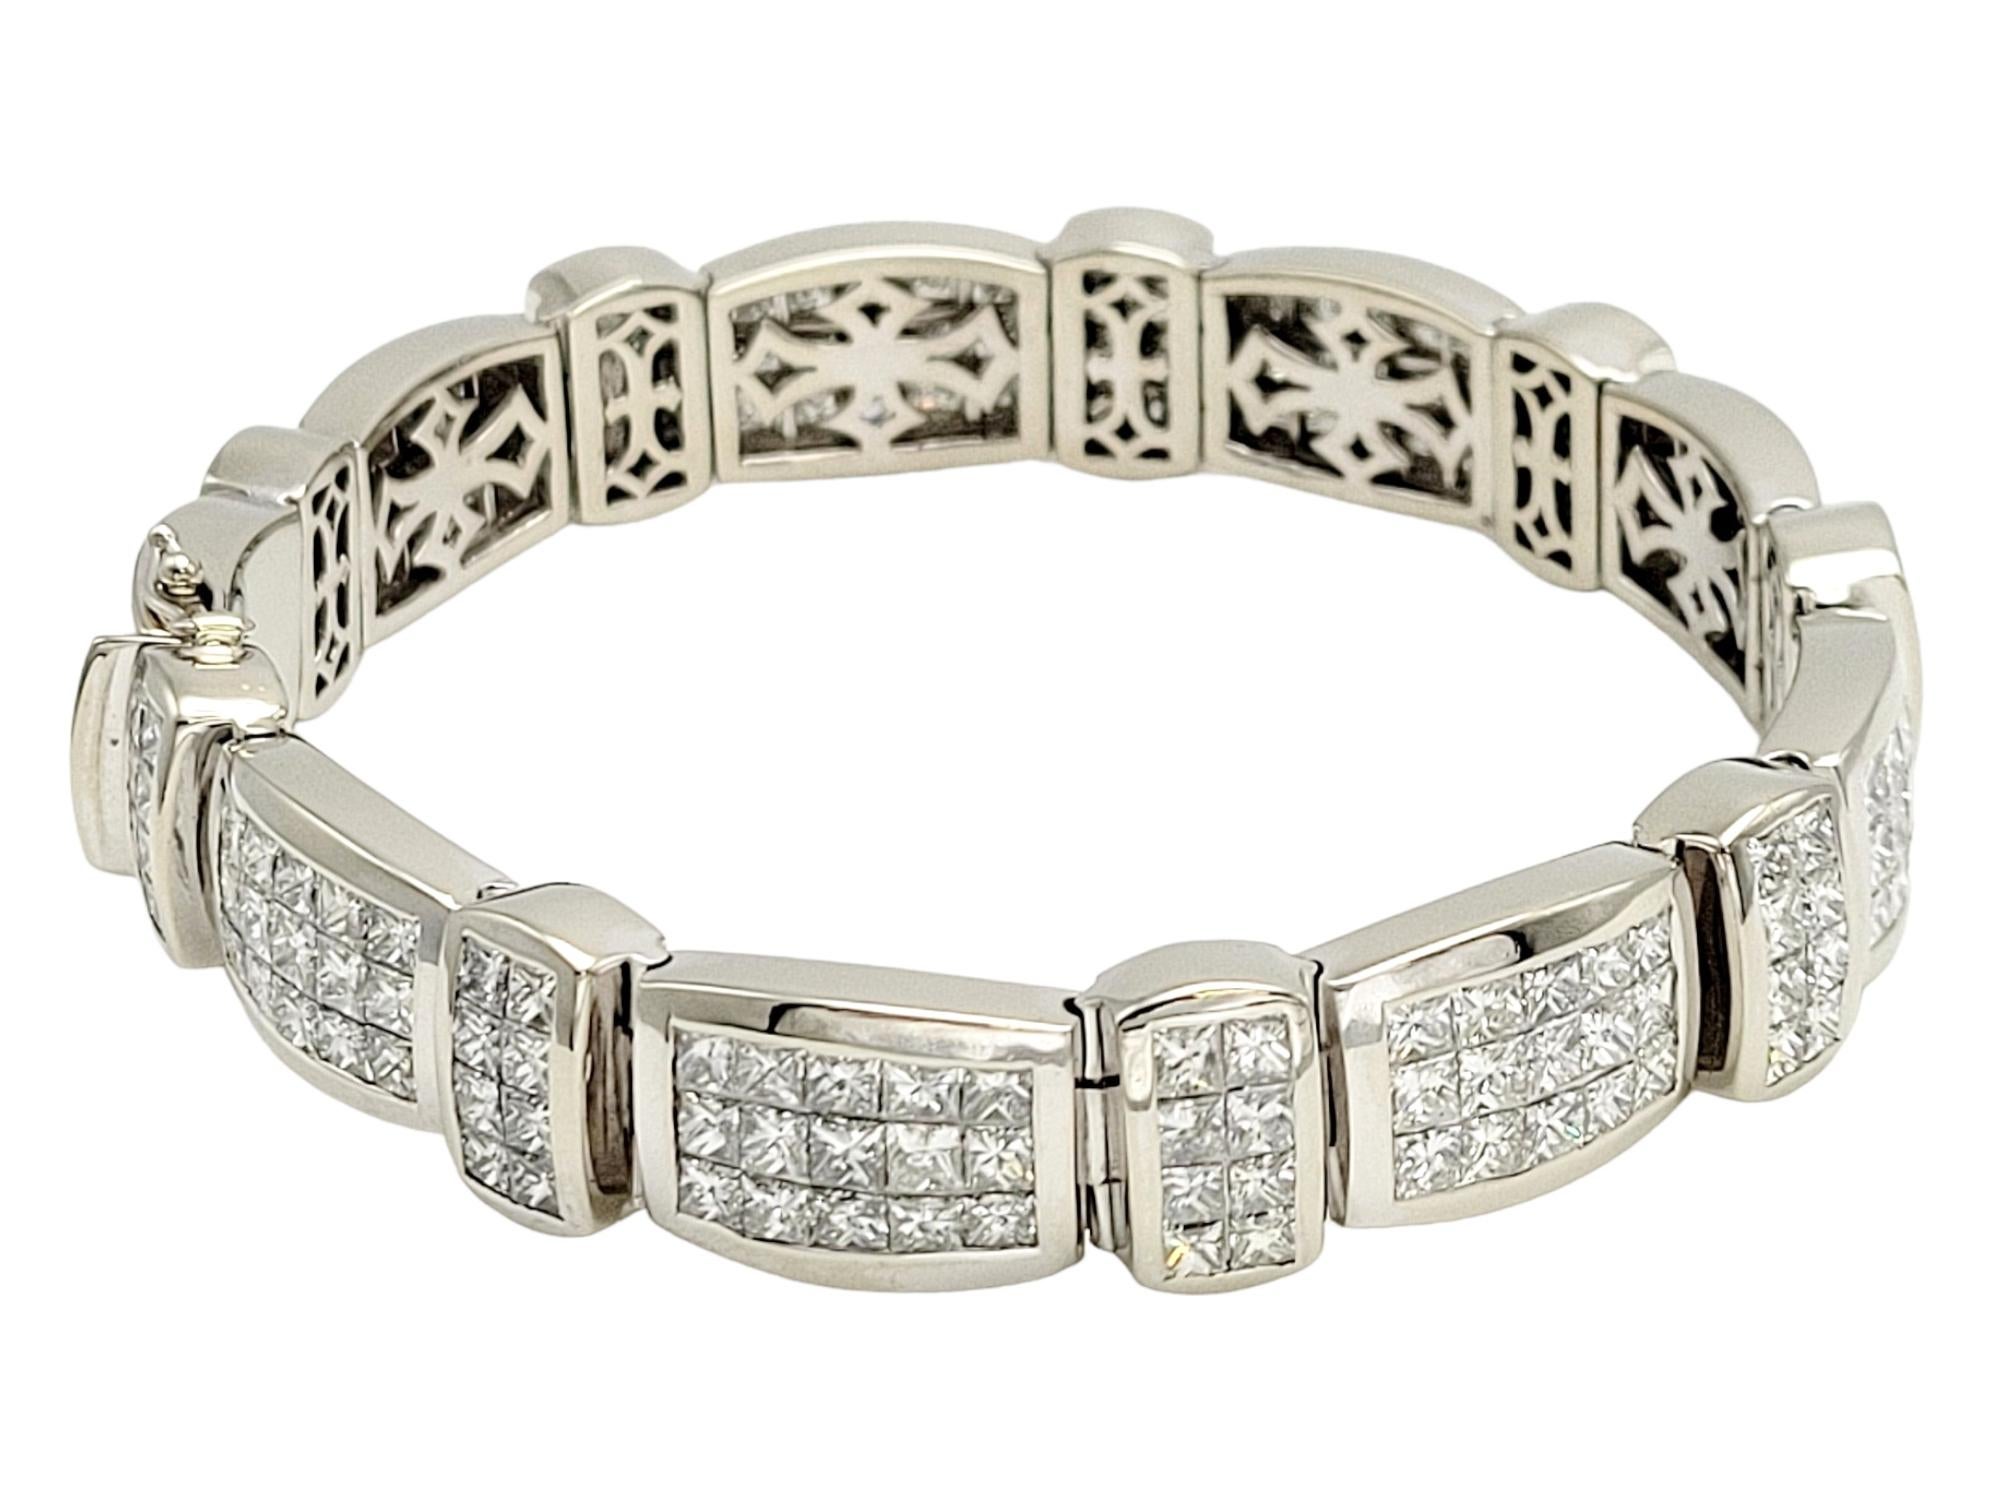 This exquisite 30.93-carat invisible set princess cut diamond link bracelet is a marvel of fine jewelry craftsmanship. This magnificent piece boasts 207 dazzling princess-cut diamonds, seamlessly and invisibly set throughout the entire bracelet,